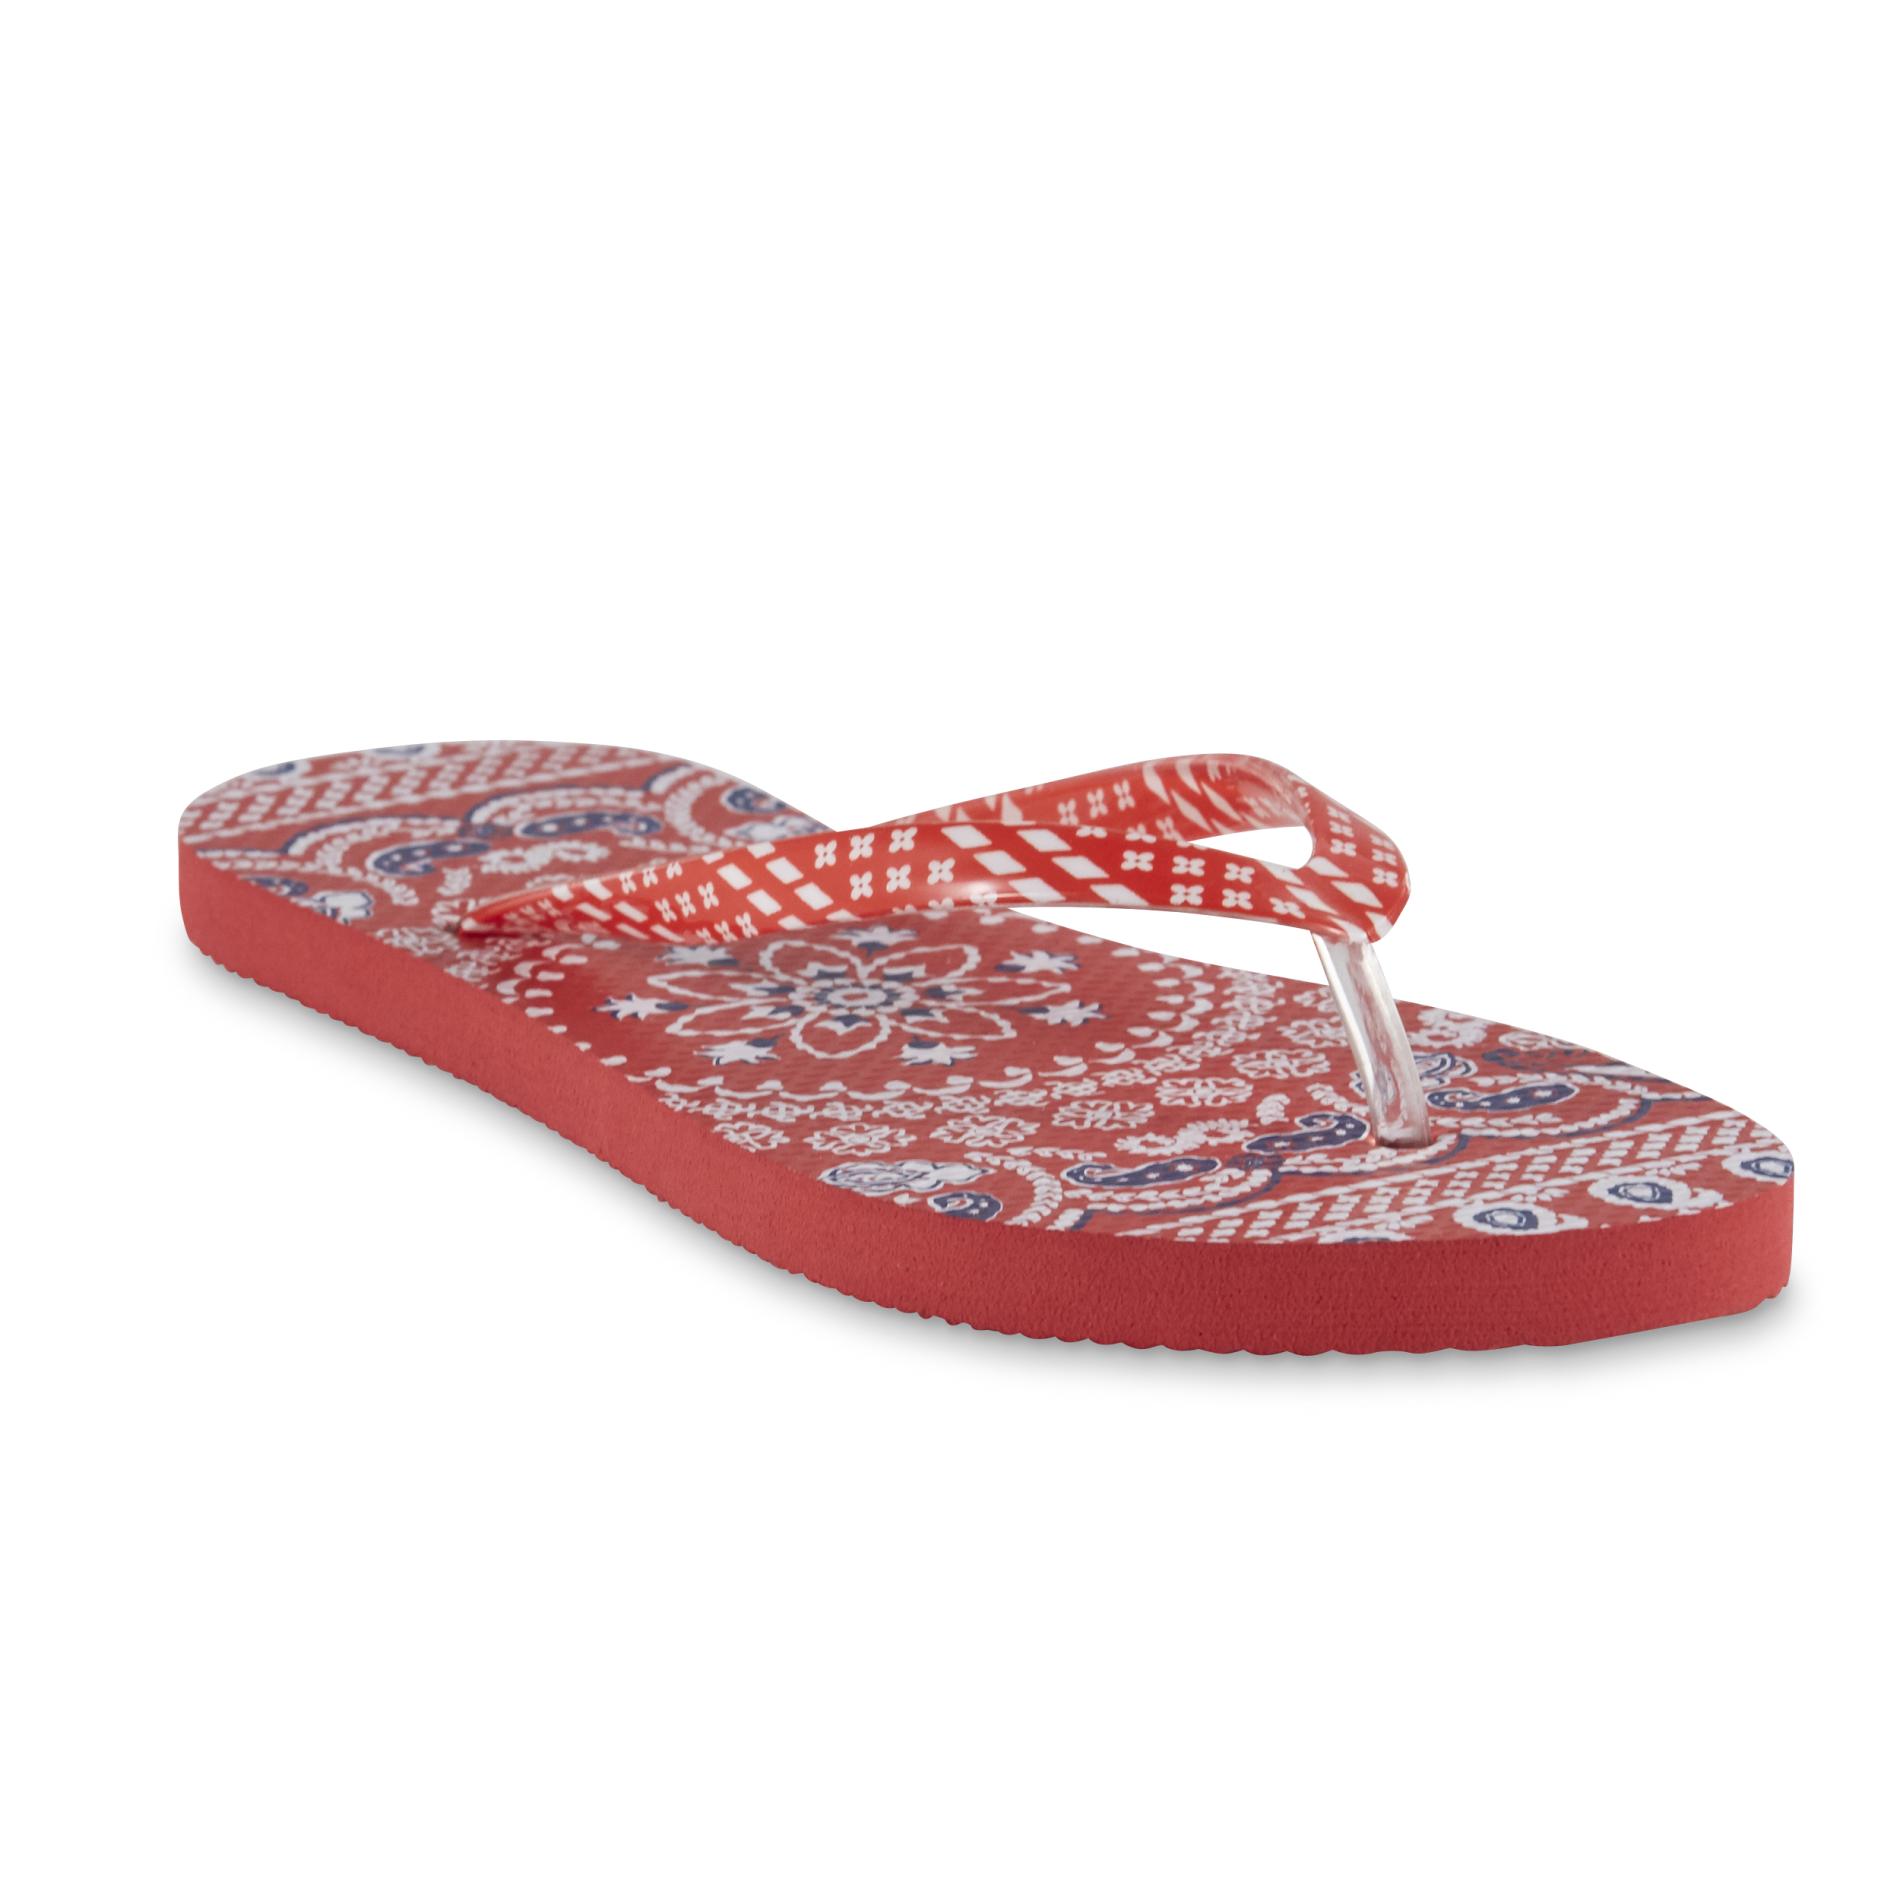 Simply Styled Women's June Flip Flop Sandal - Red/White